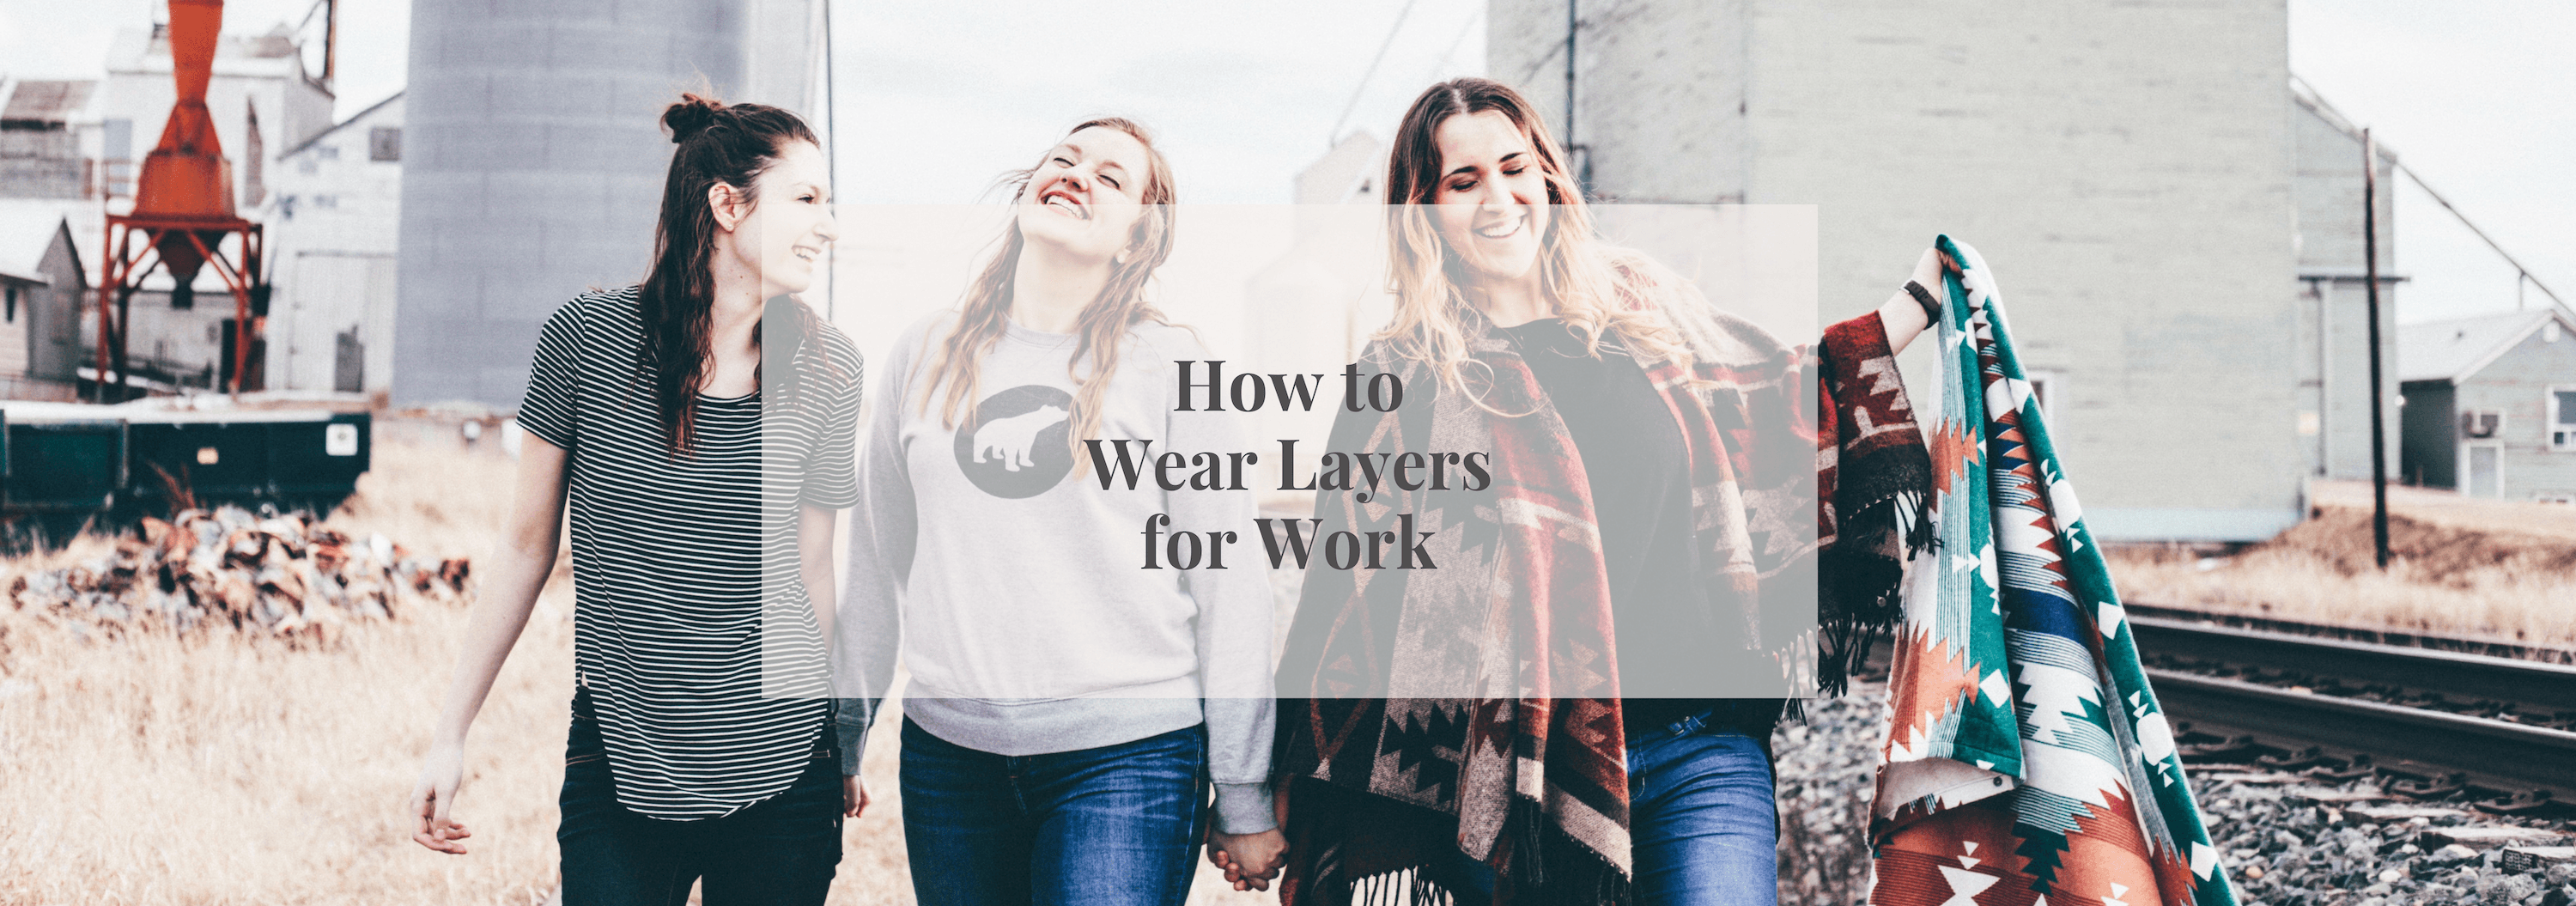 How to Wear Layers for Work - Numi